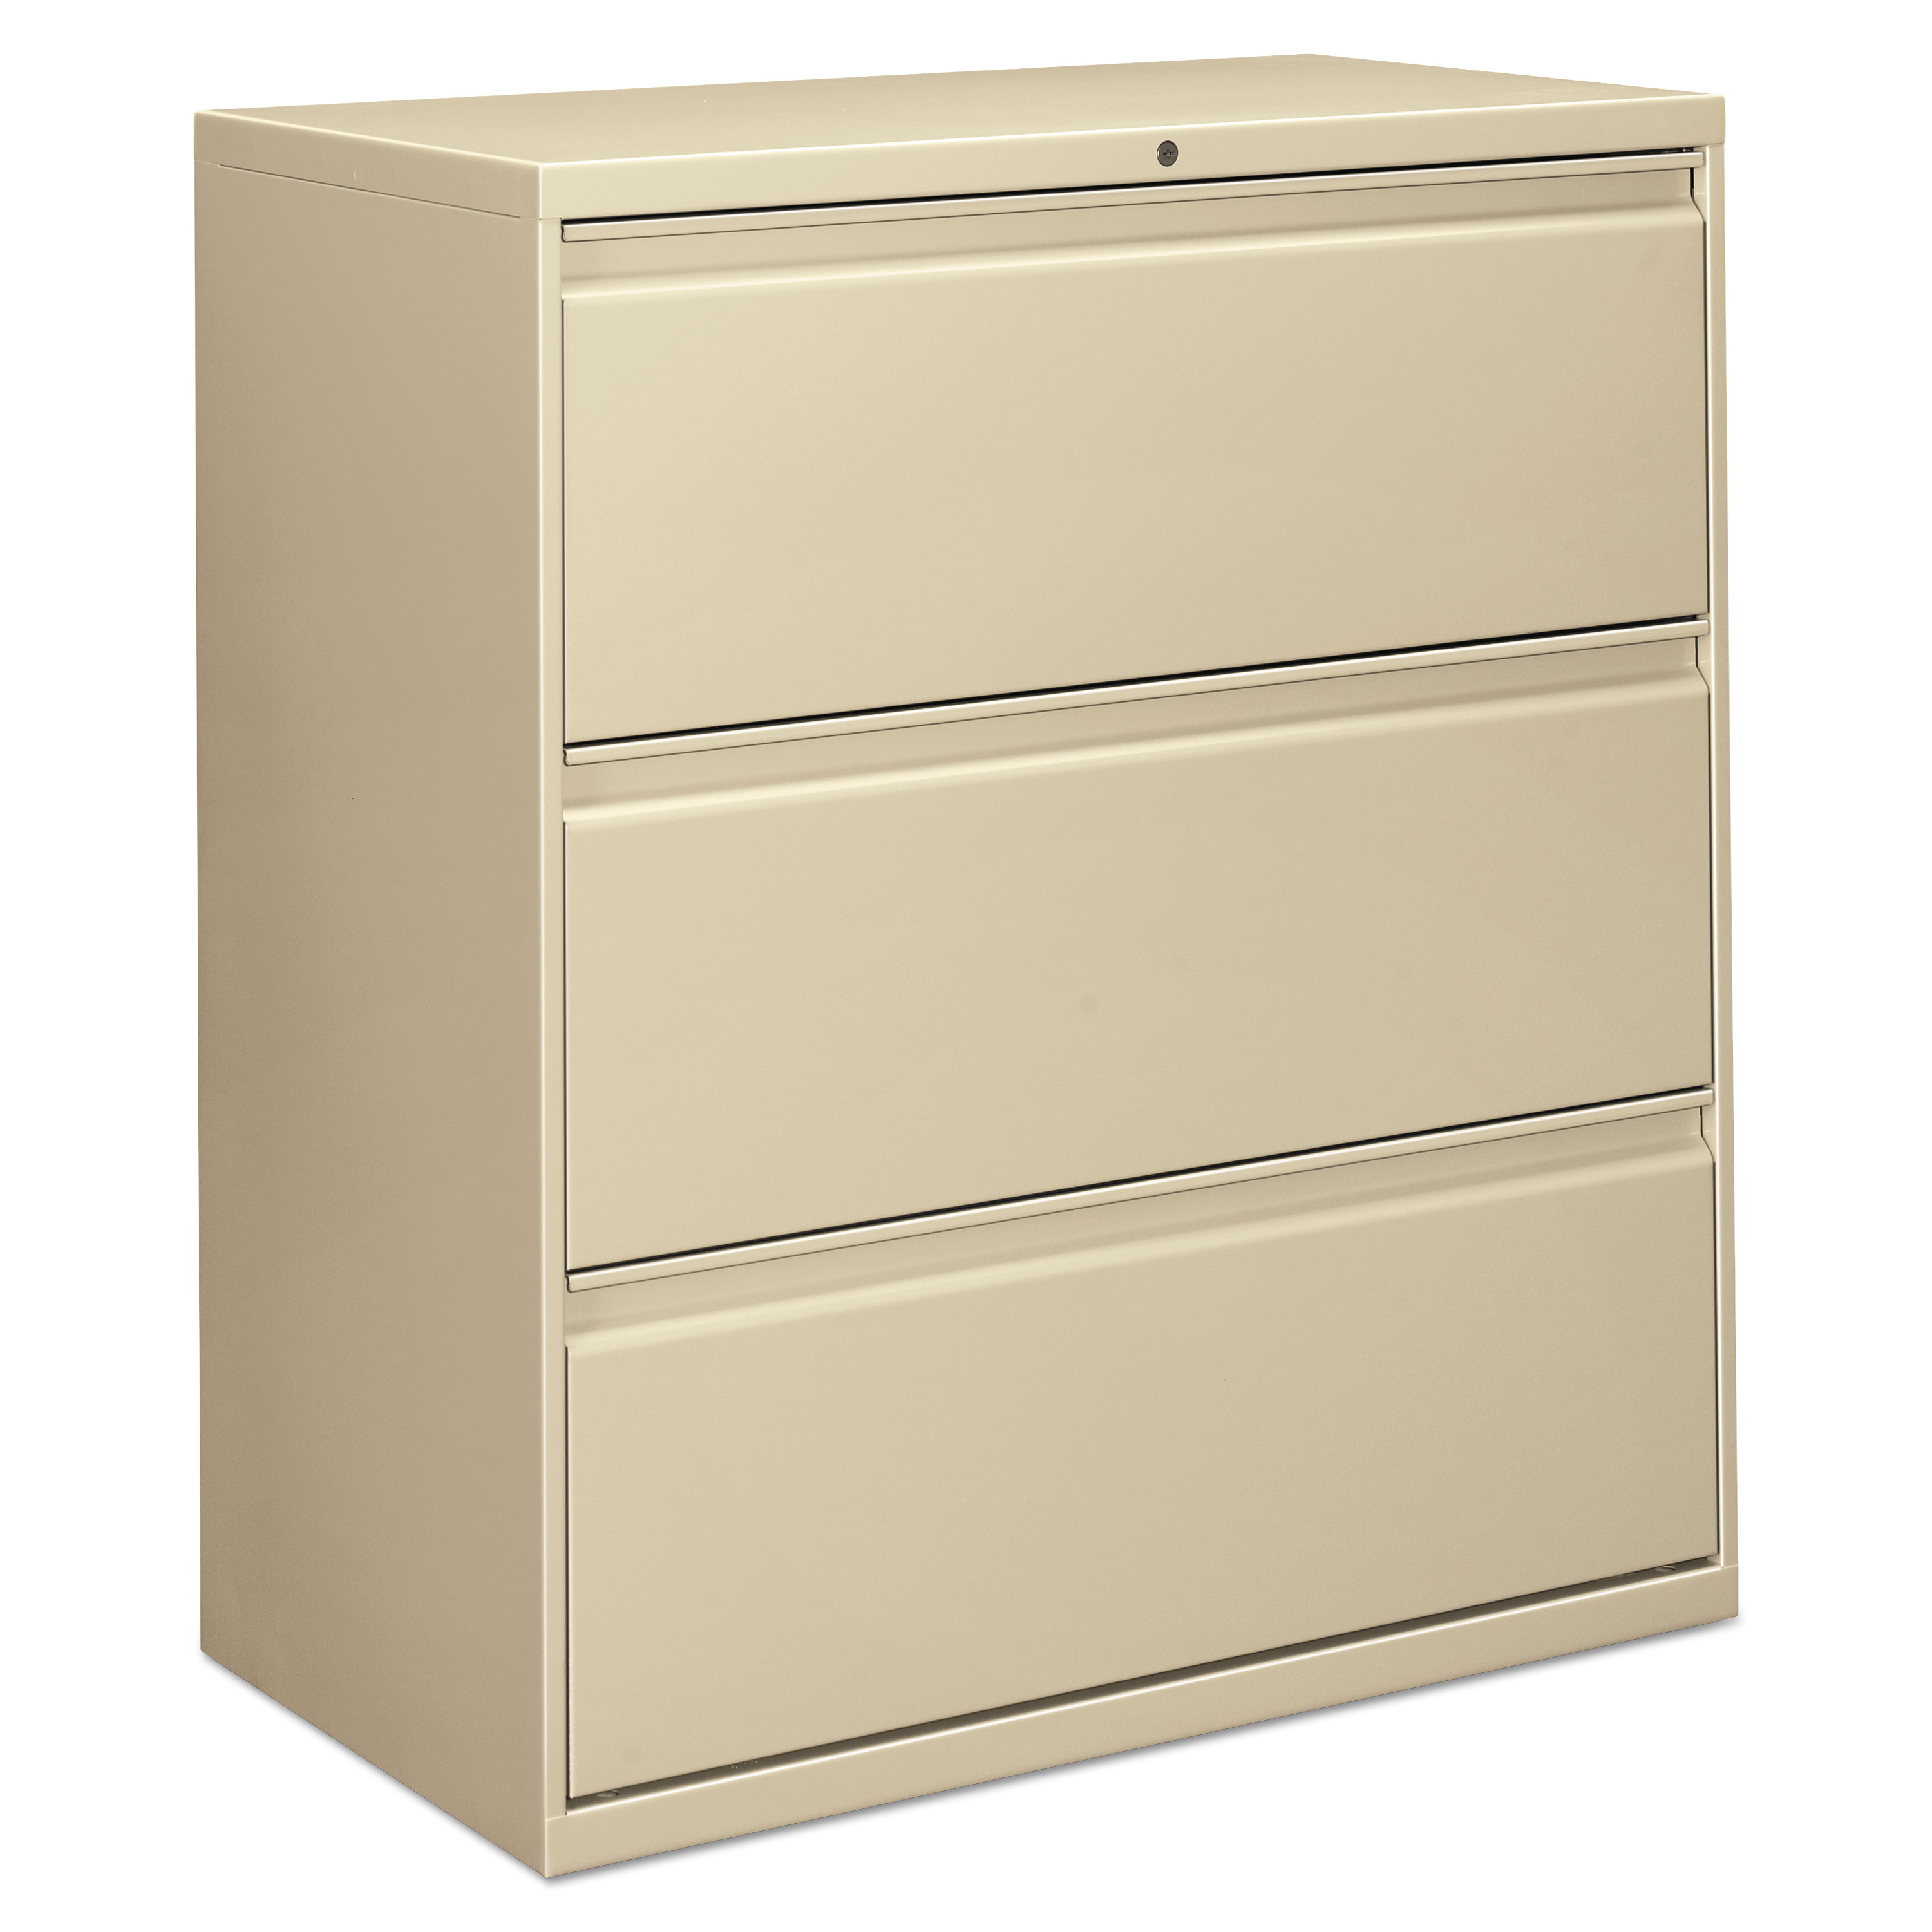 Three-Drawer Lateral File Cabinet, 36w x 18d x 39 1/2h, Putty